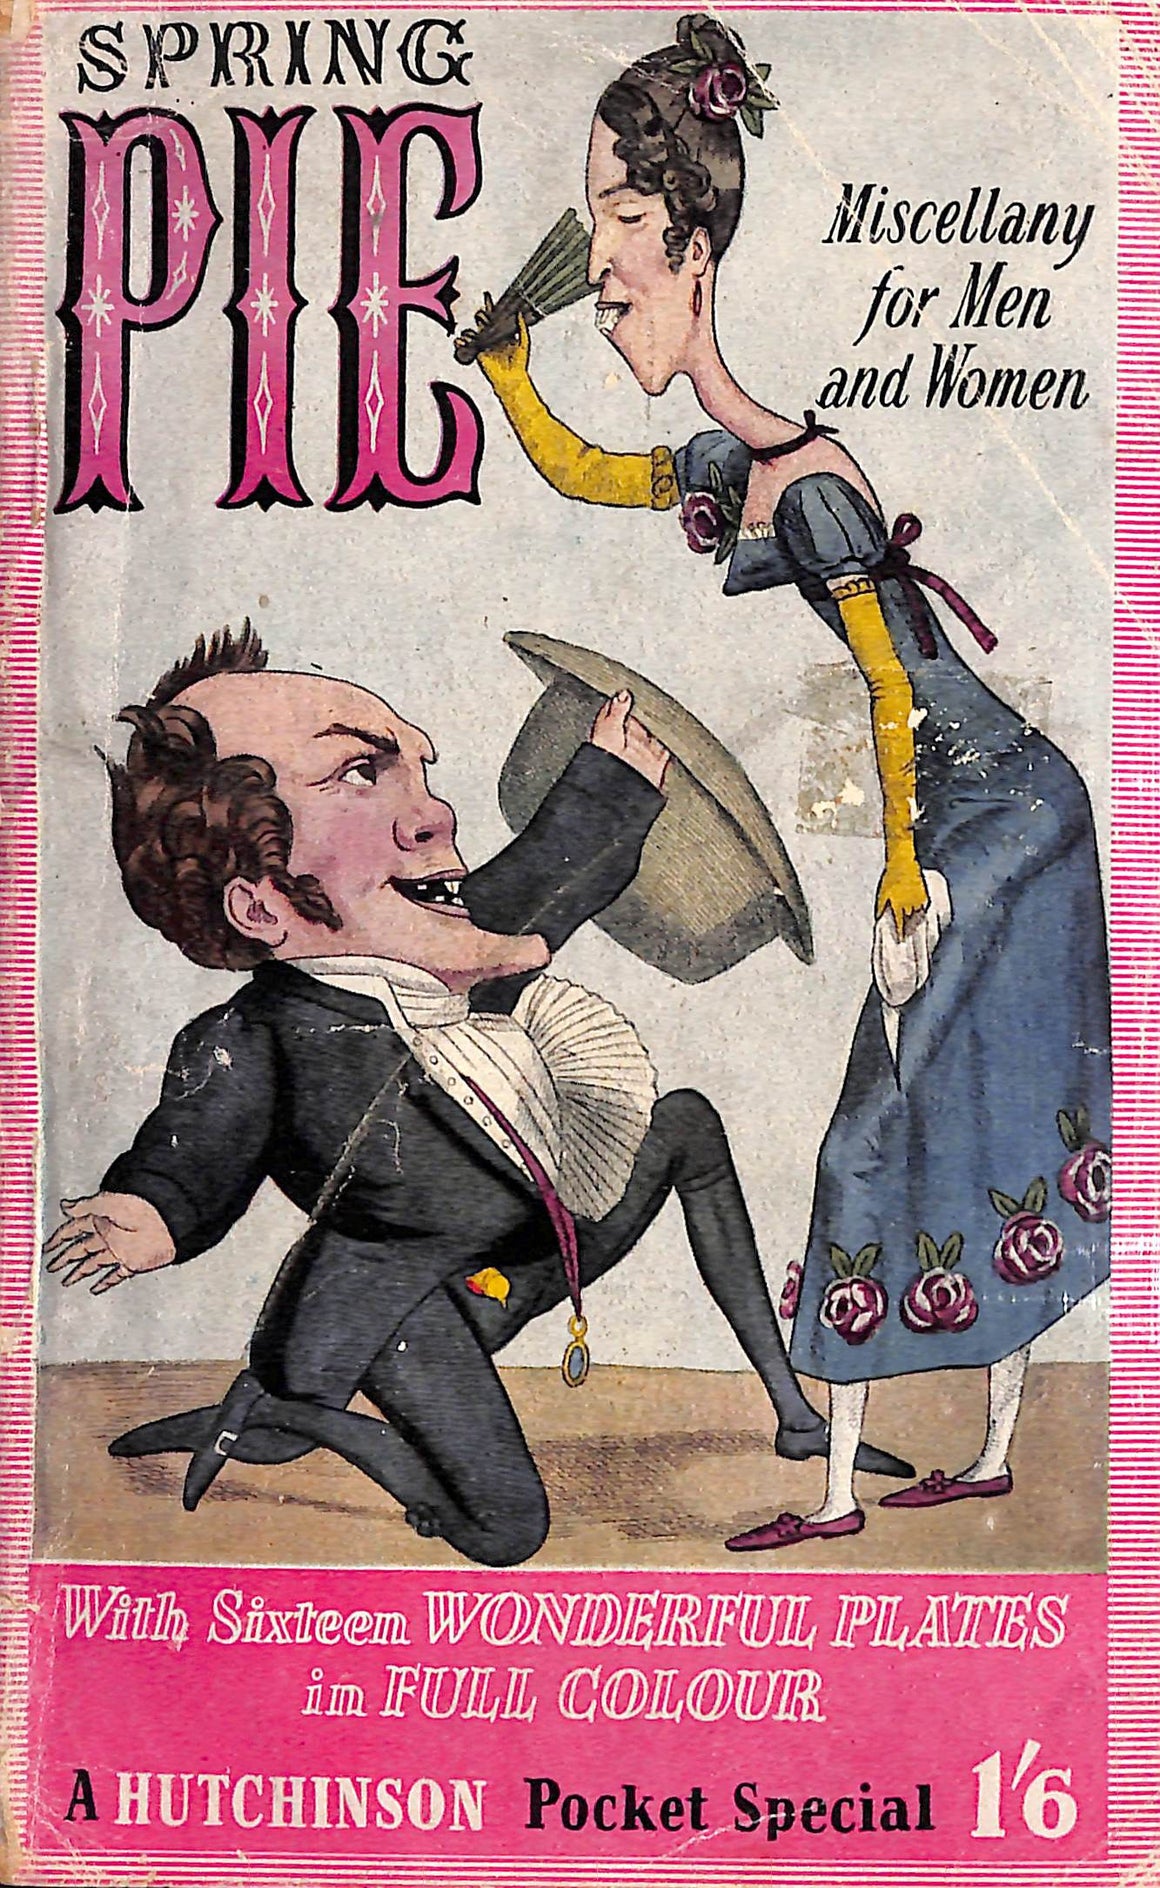 "Spring Pie: Miscellany For Men And Women" 1940